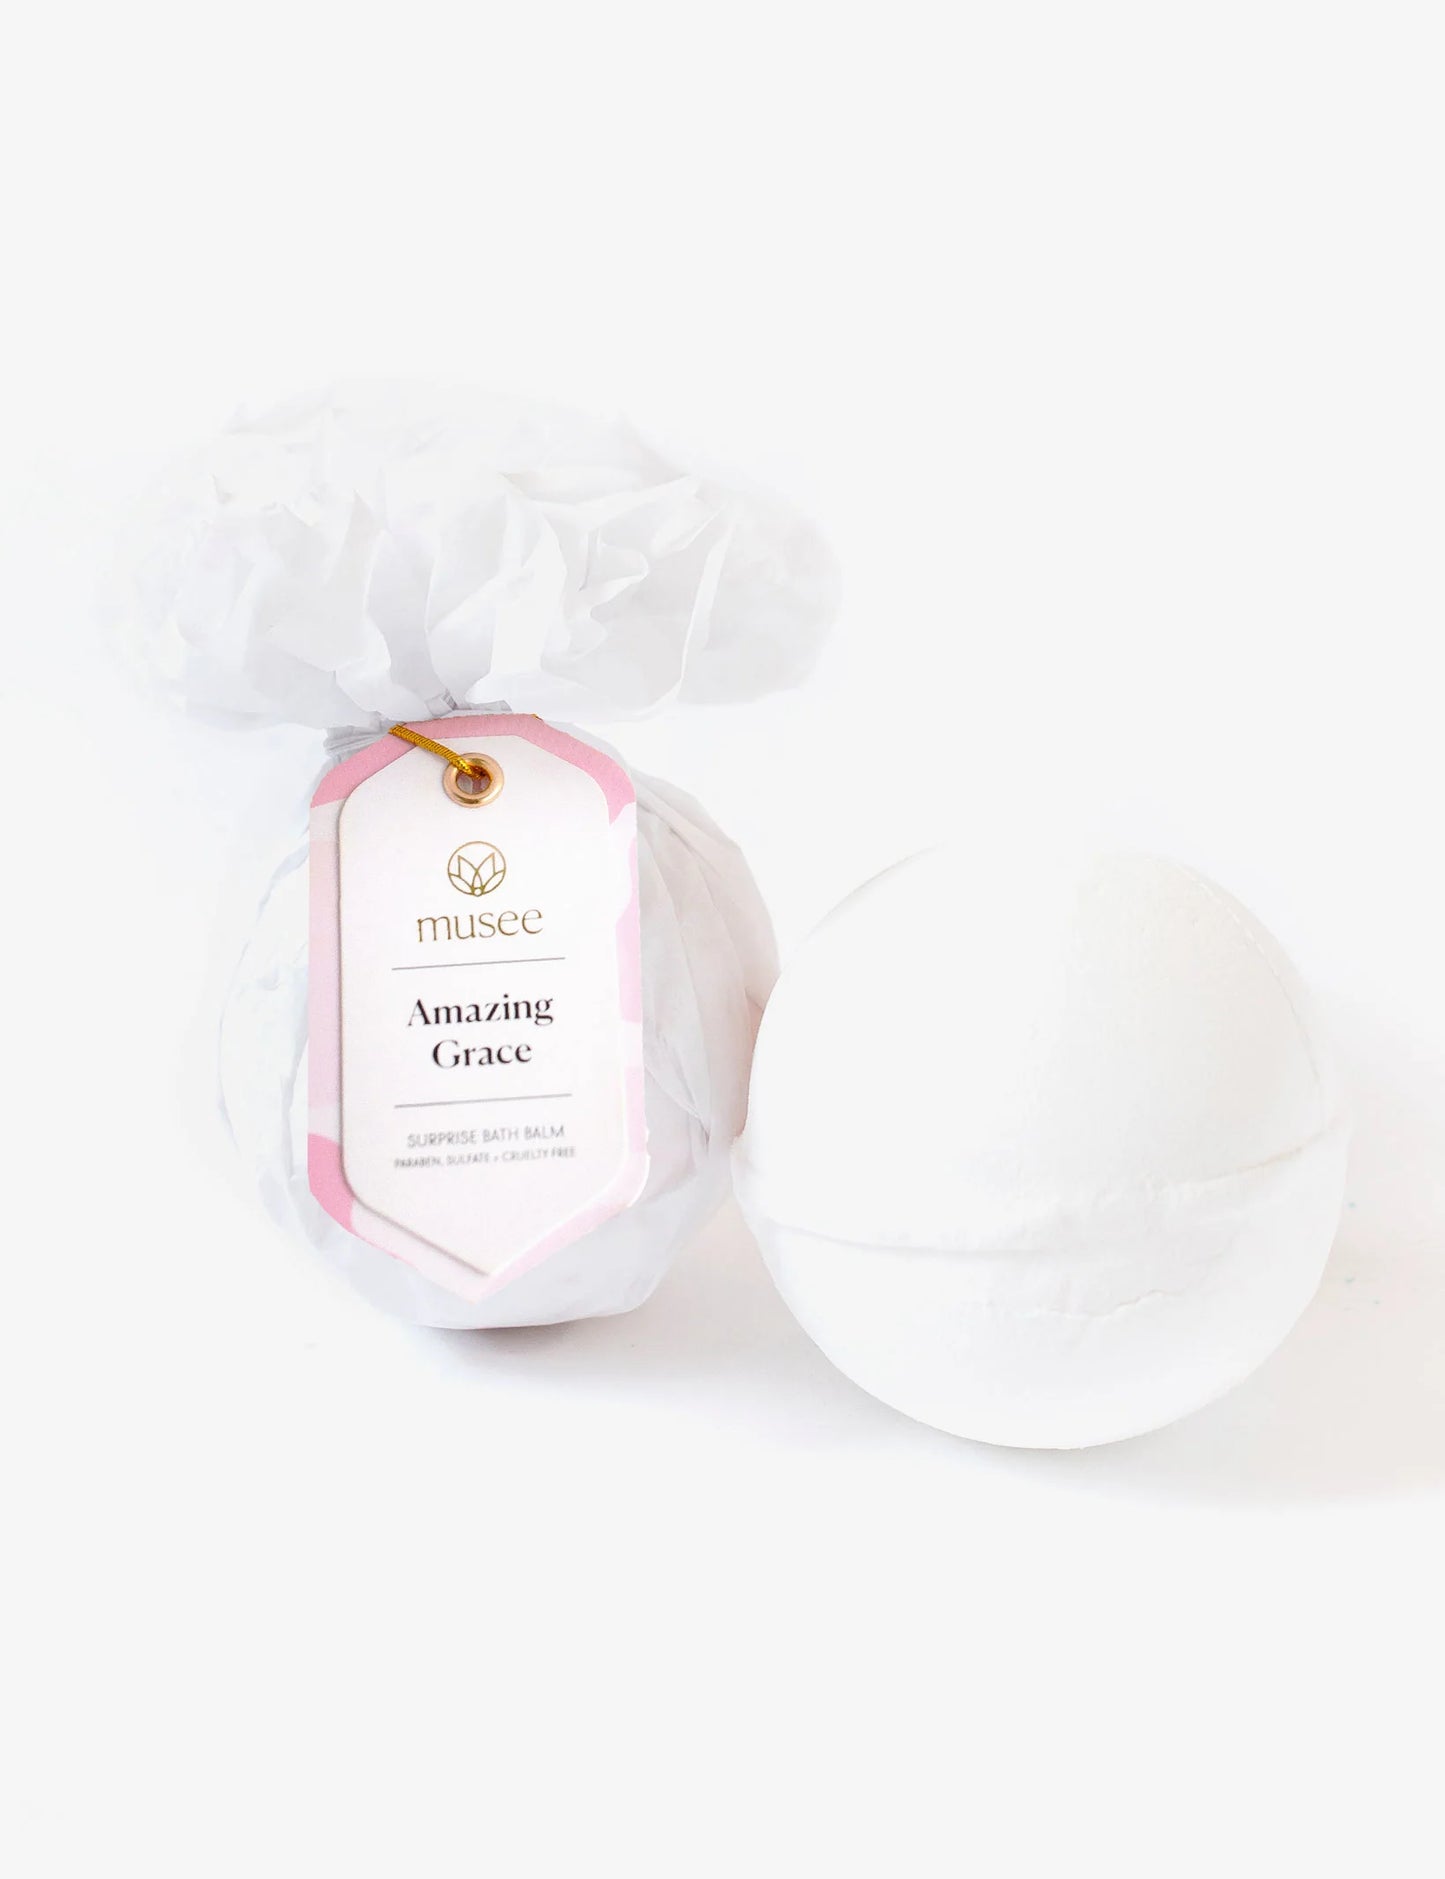 A luxurious Amazing Grace Bath Balm with a pink label by Musee.